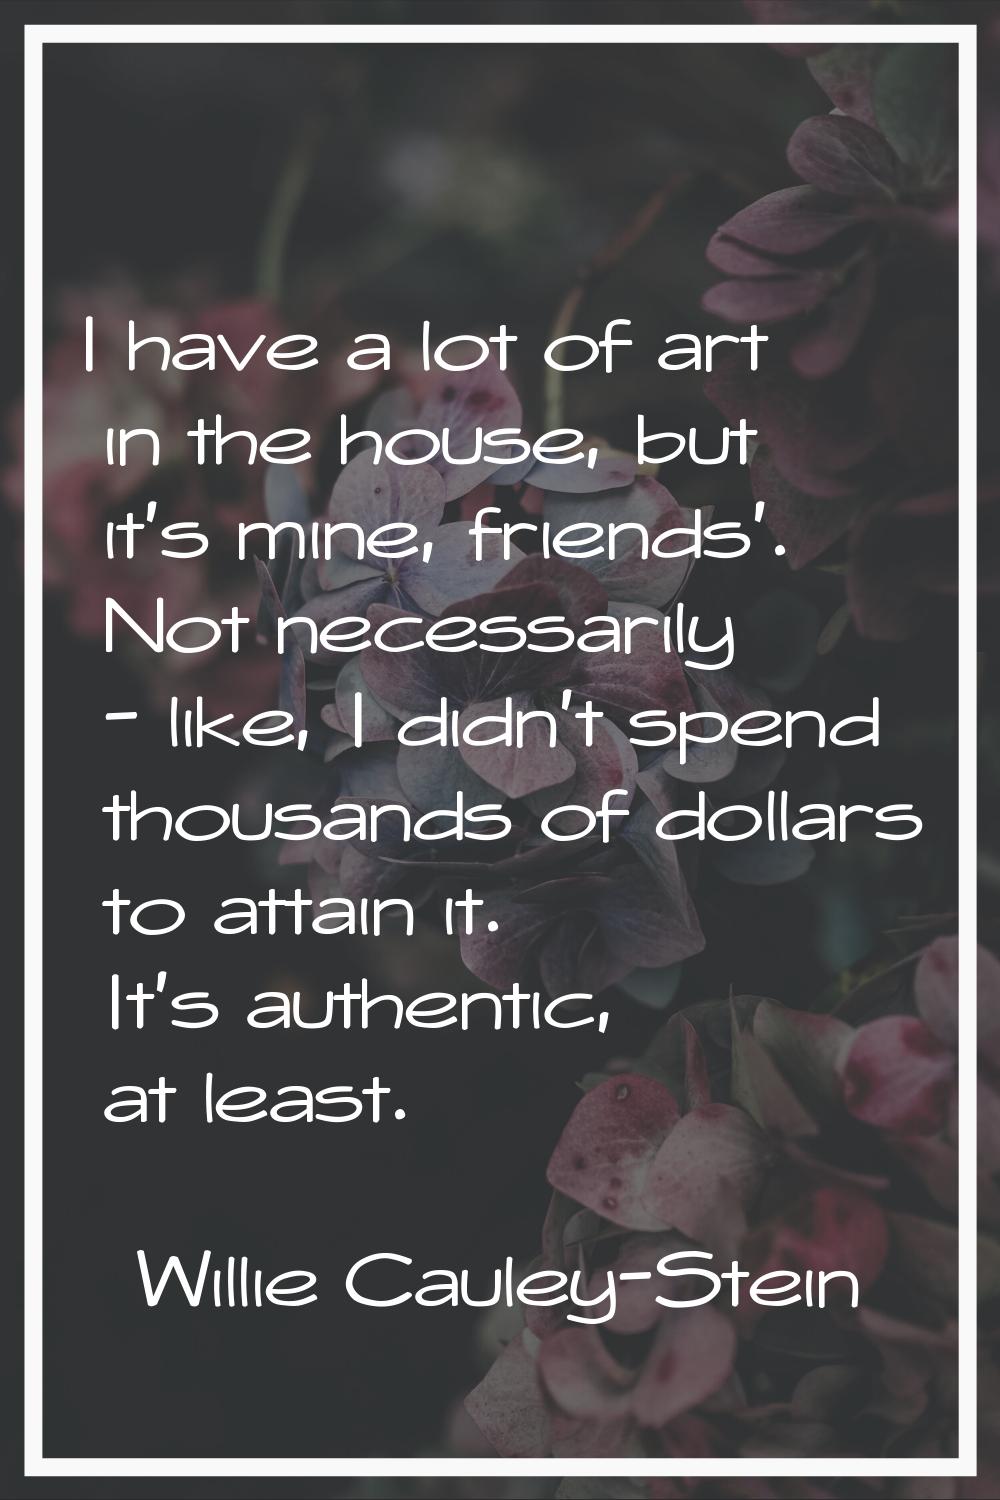 I have a lot of art in the house, but it's mine, friends'. Not necessarily - like, I didn't spend t